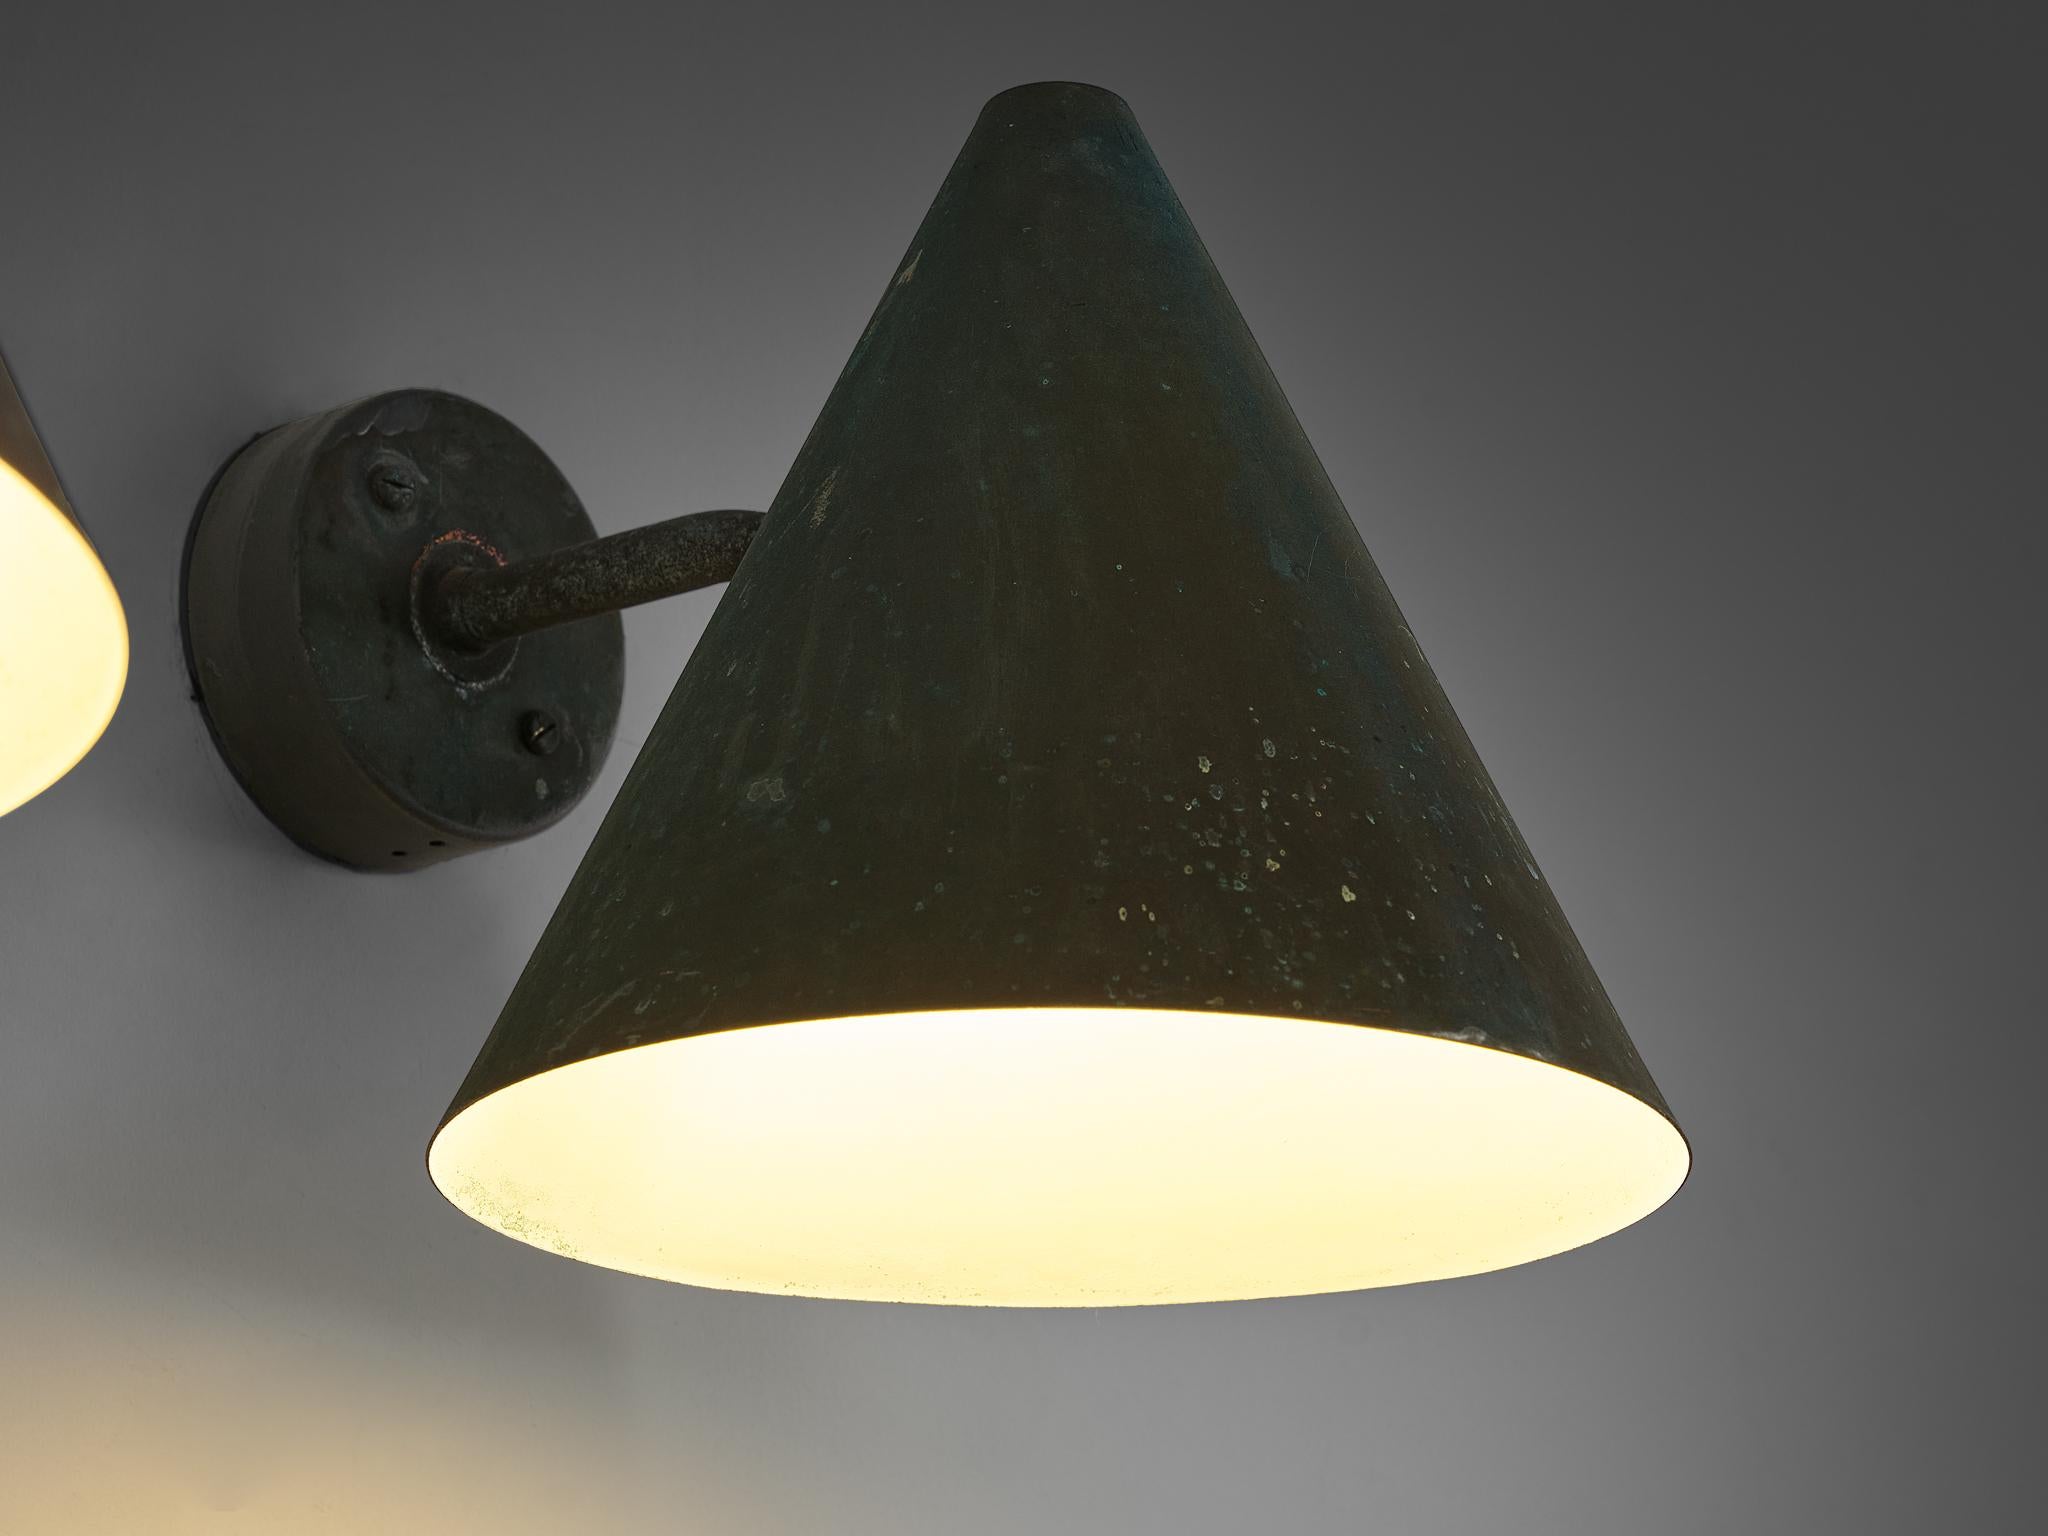  Hans-Agne Jakobsson 'Tratten' Wall Lights in Patinated Copper  1